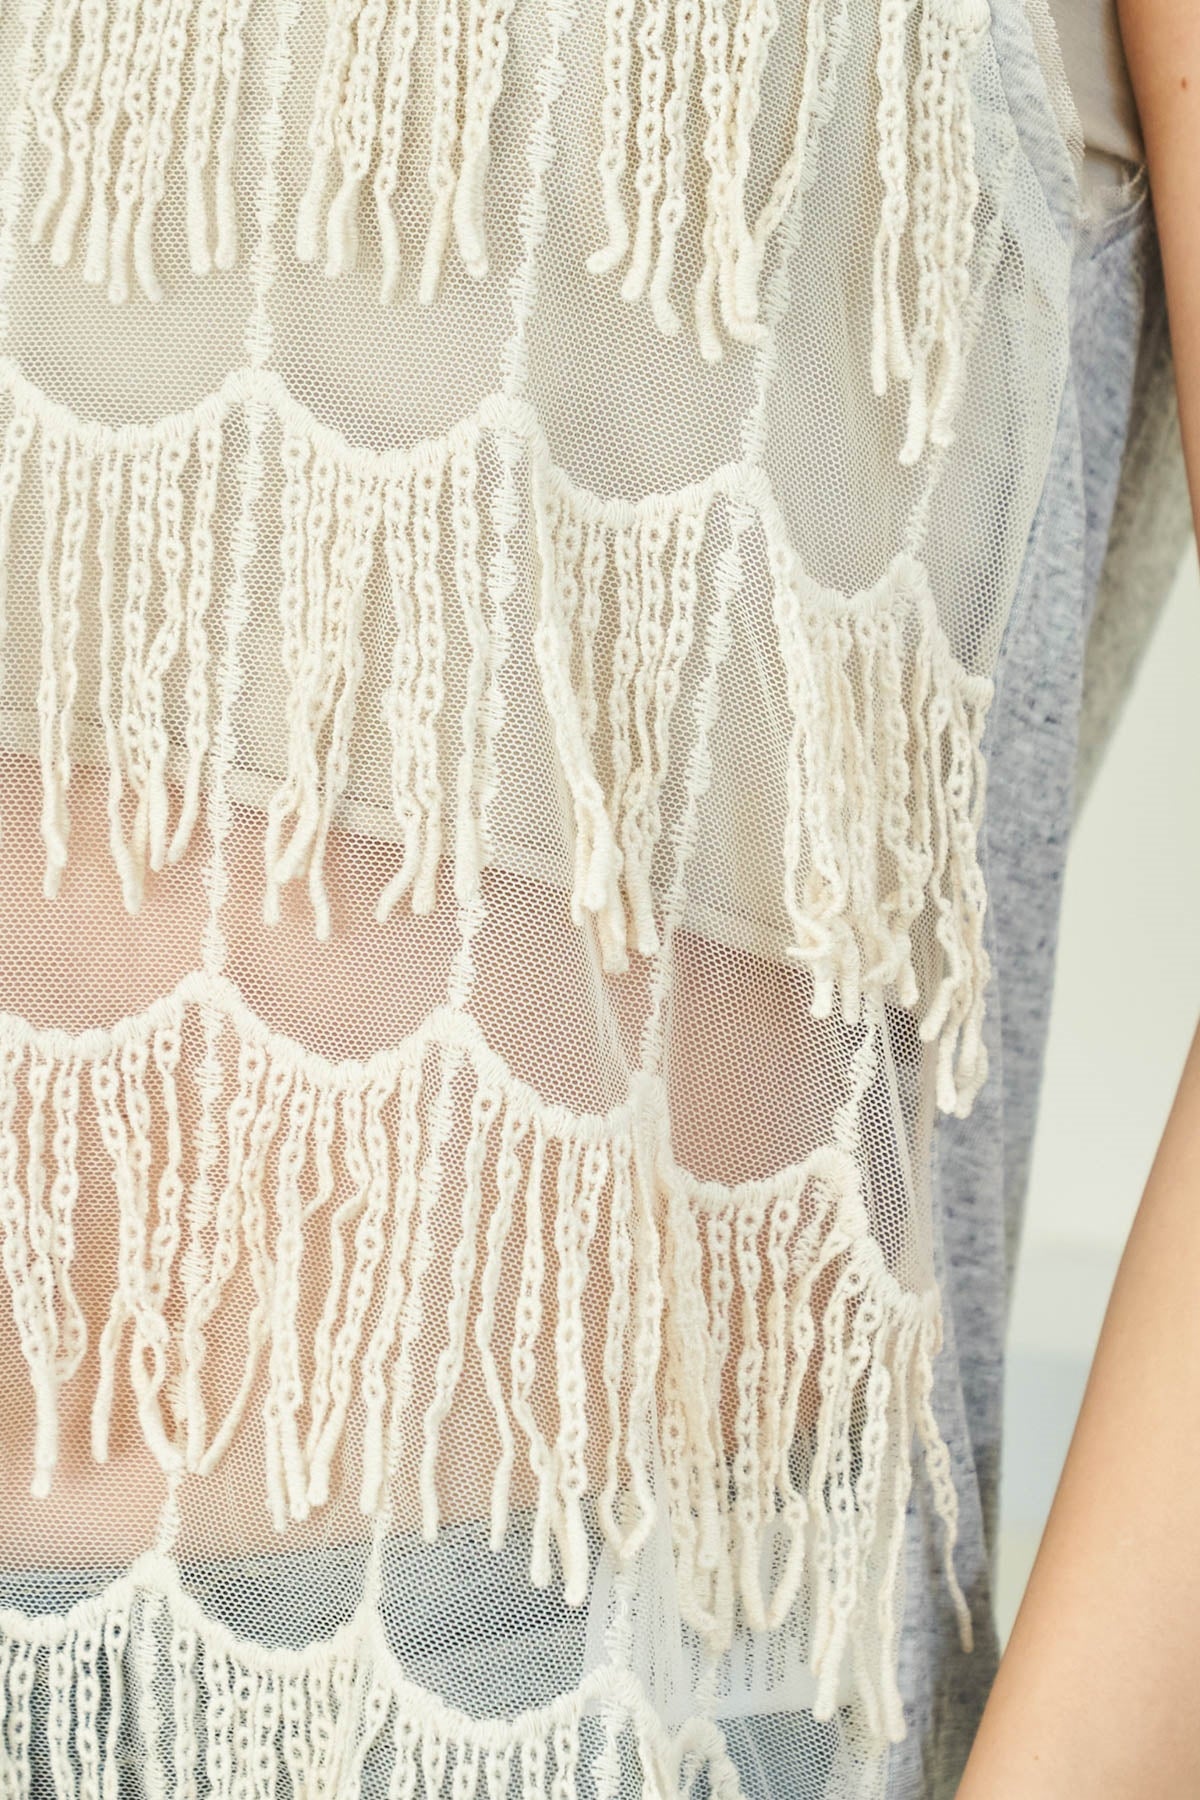 GRAY ROUND NECK WITH CROCHET FRINGE DETAIL HIGH-LOW SLEEVELESS TOP